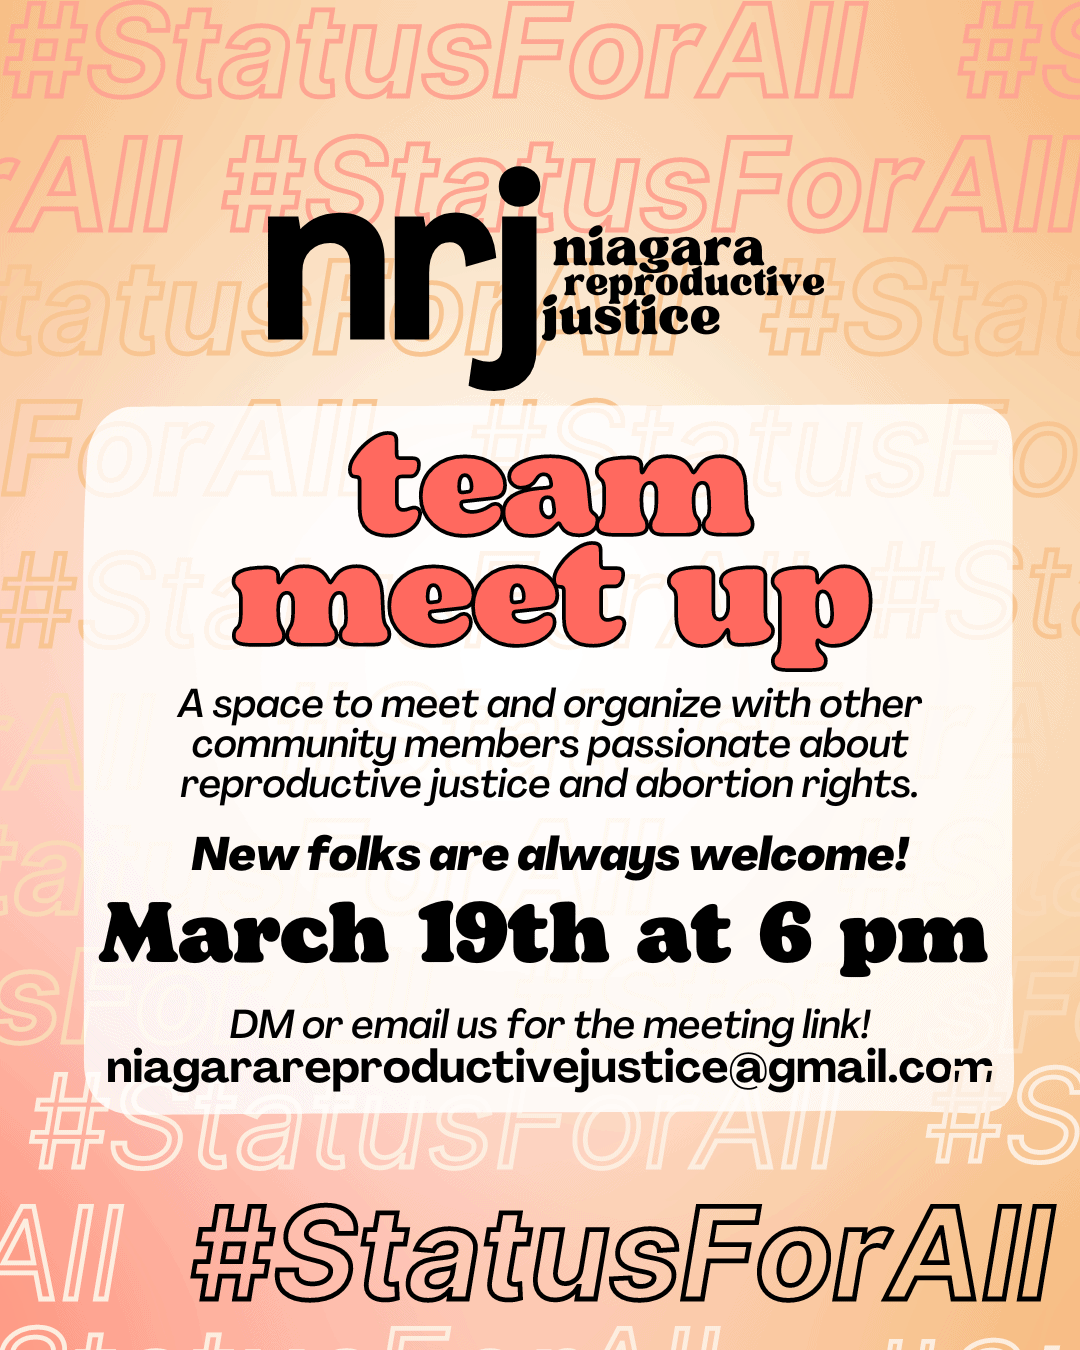 team meet up. A space to meet and organize with other community members passionate about reproductive justice and abortion rights. New folks are always welcome! March 19th at 6 pm. DM or email us for the meeting link! niagarareproductivejustice@gmail.com. #StatusForAll.